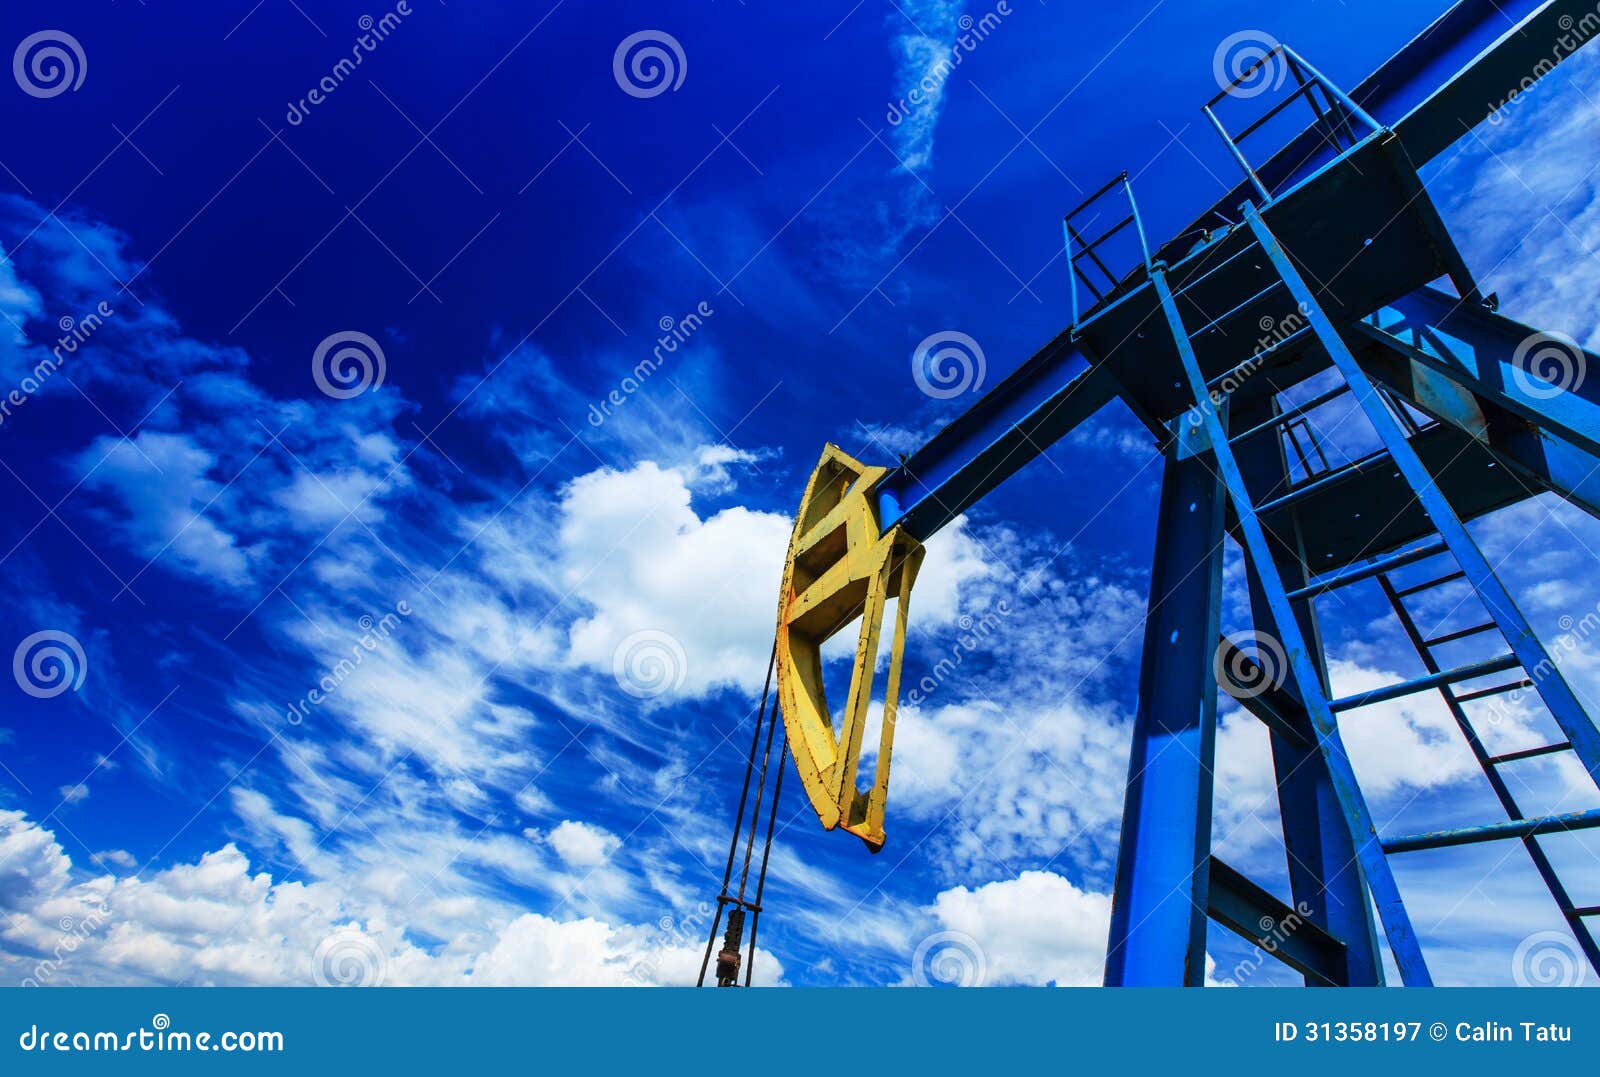 oil and gas pump operating